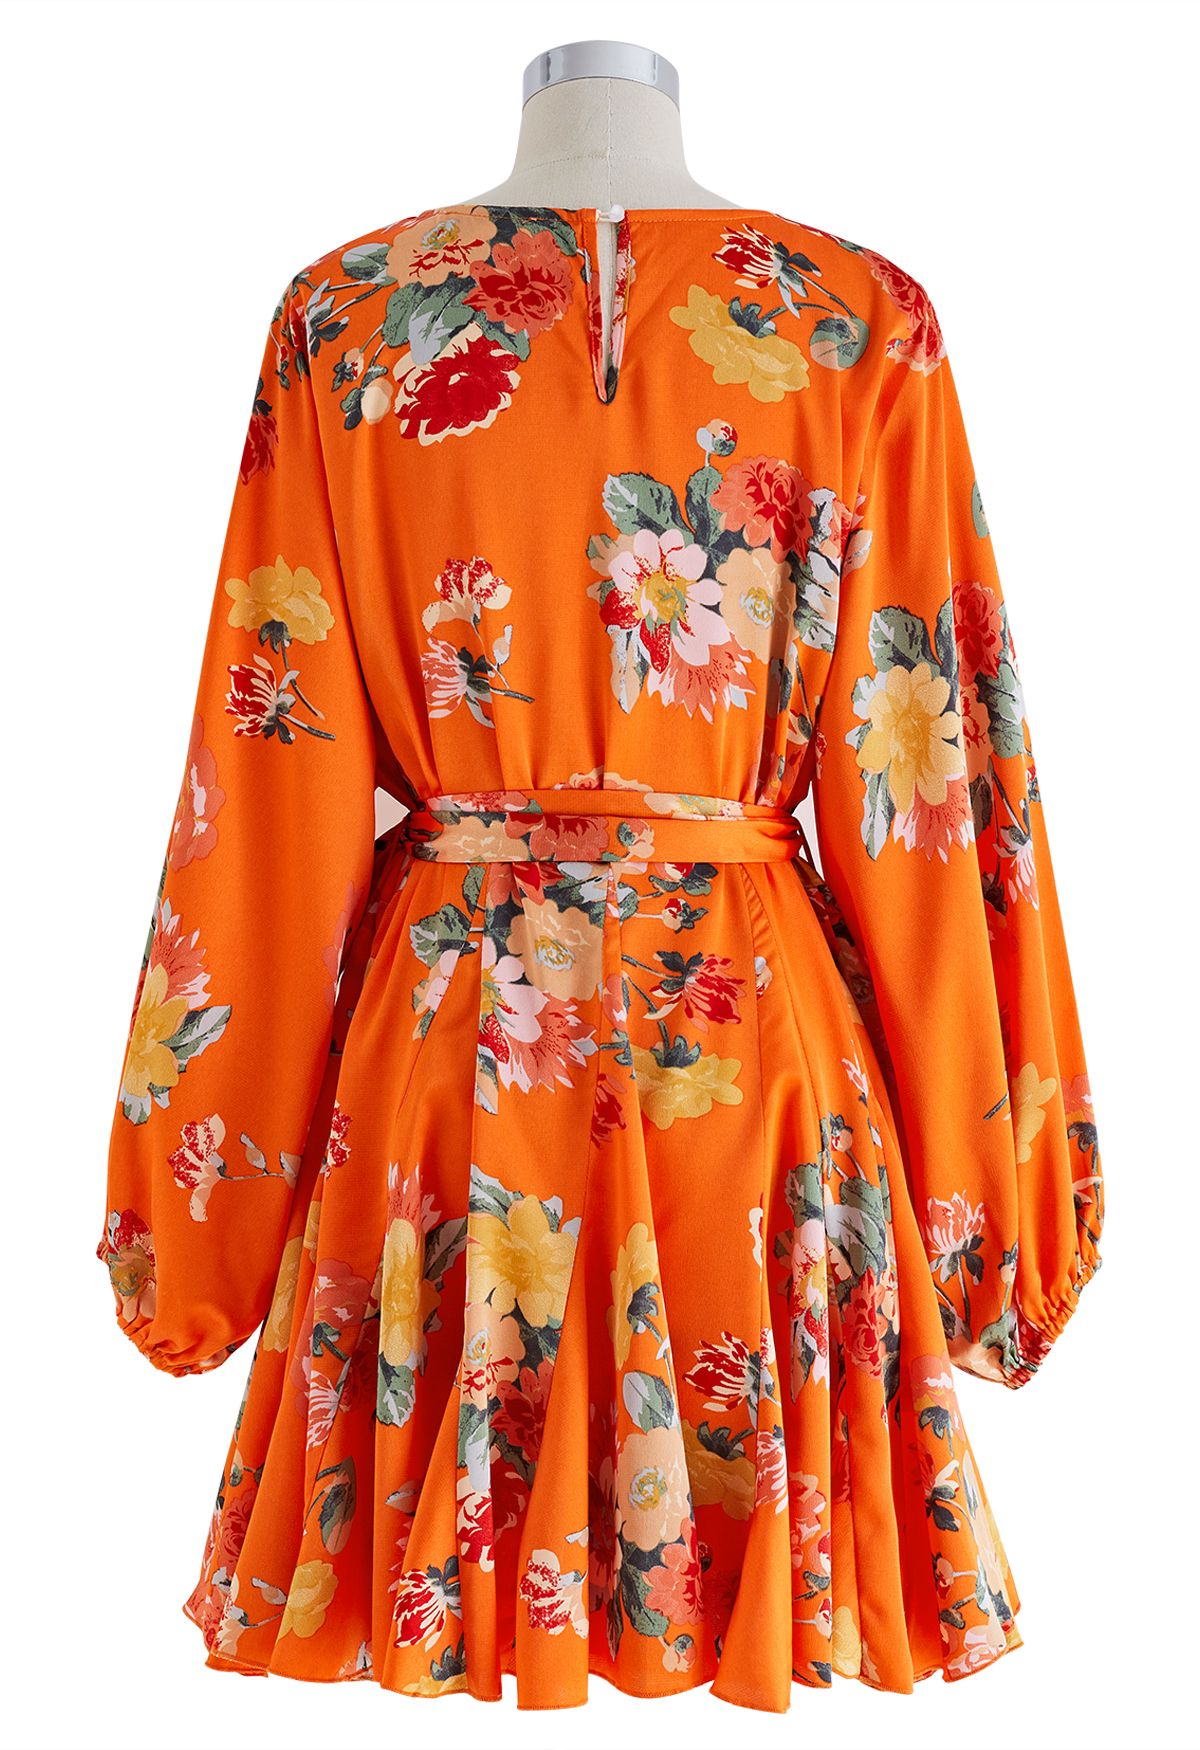 Dreamy Bouquet Printed Bubble Sleeves Frilling Dress in Orange